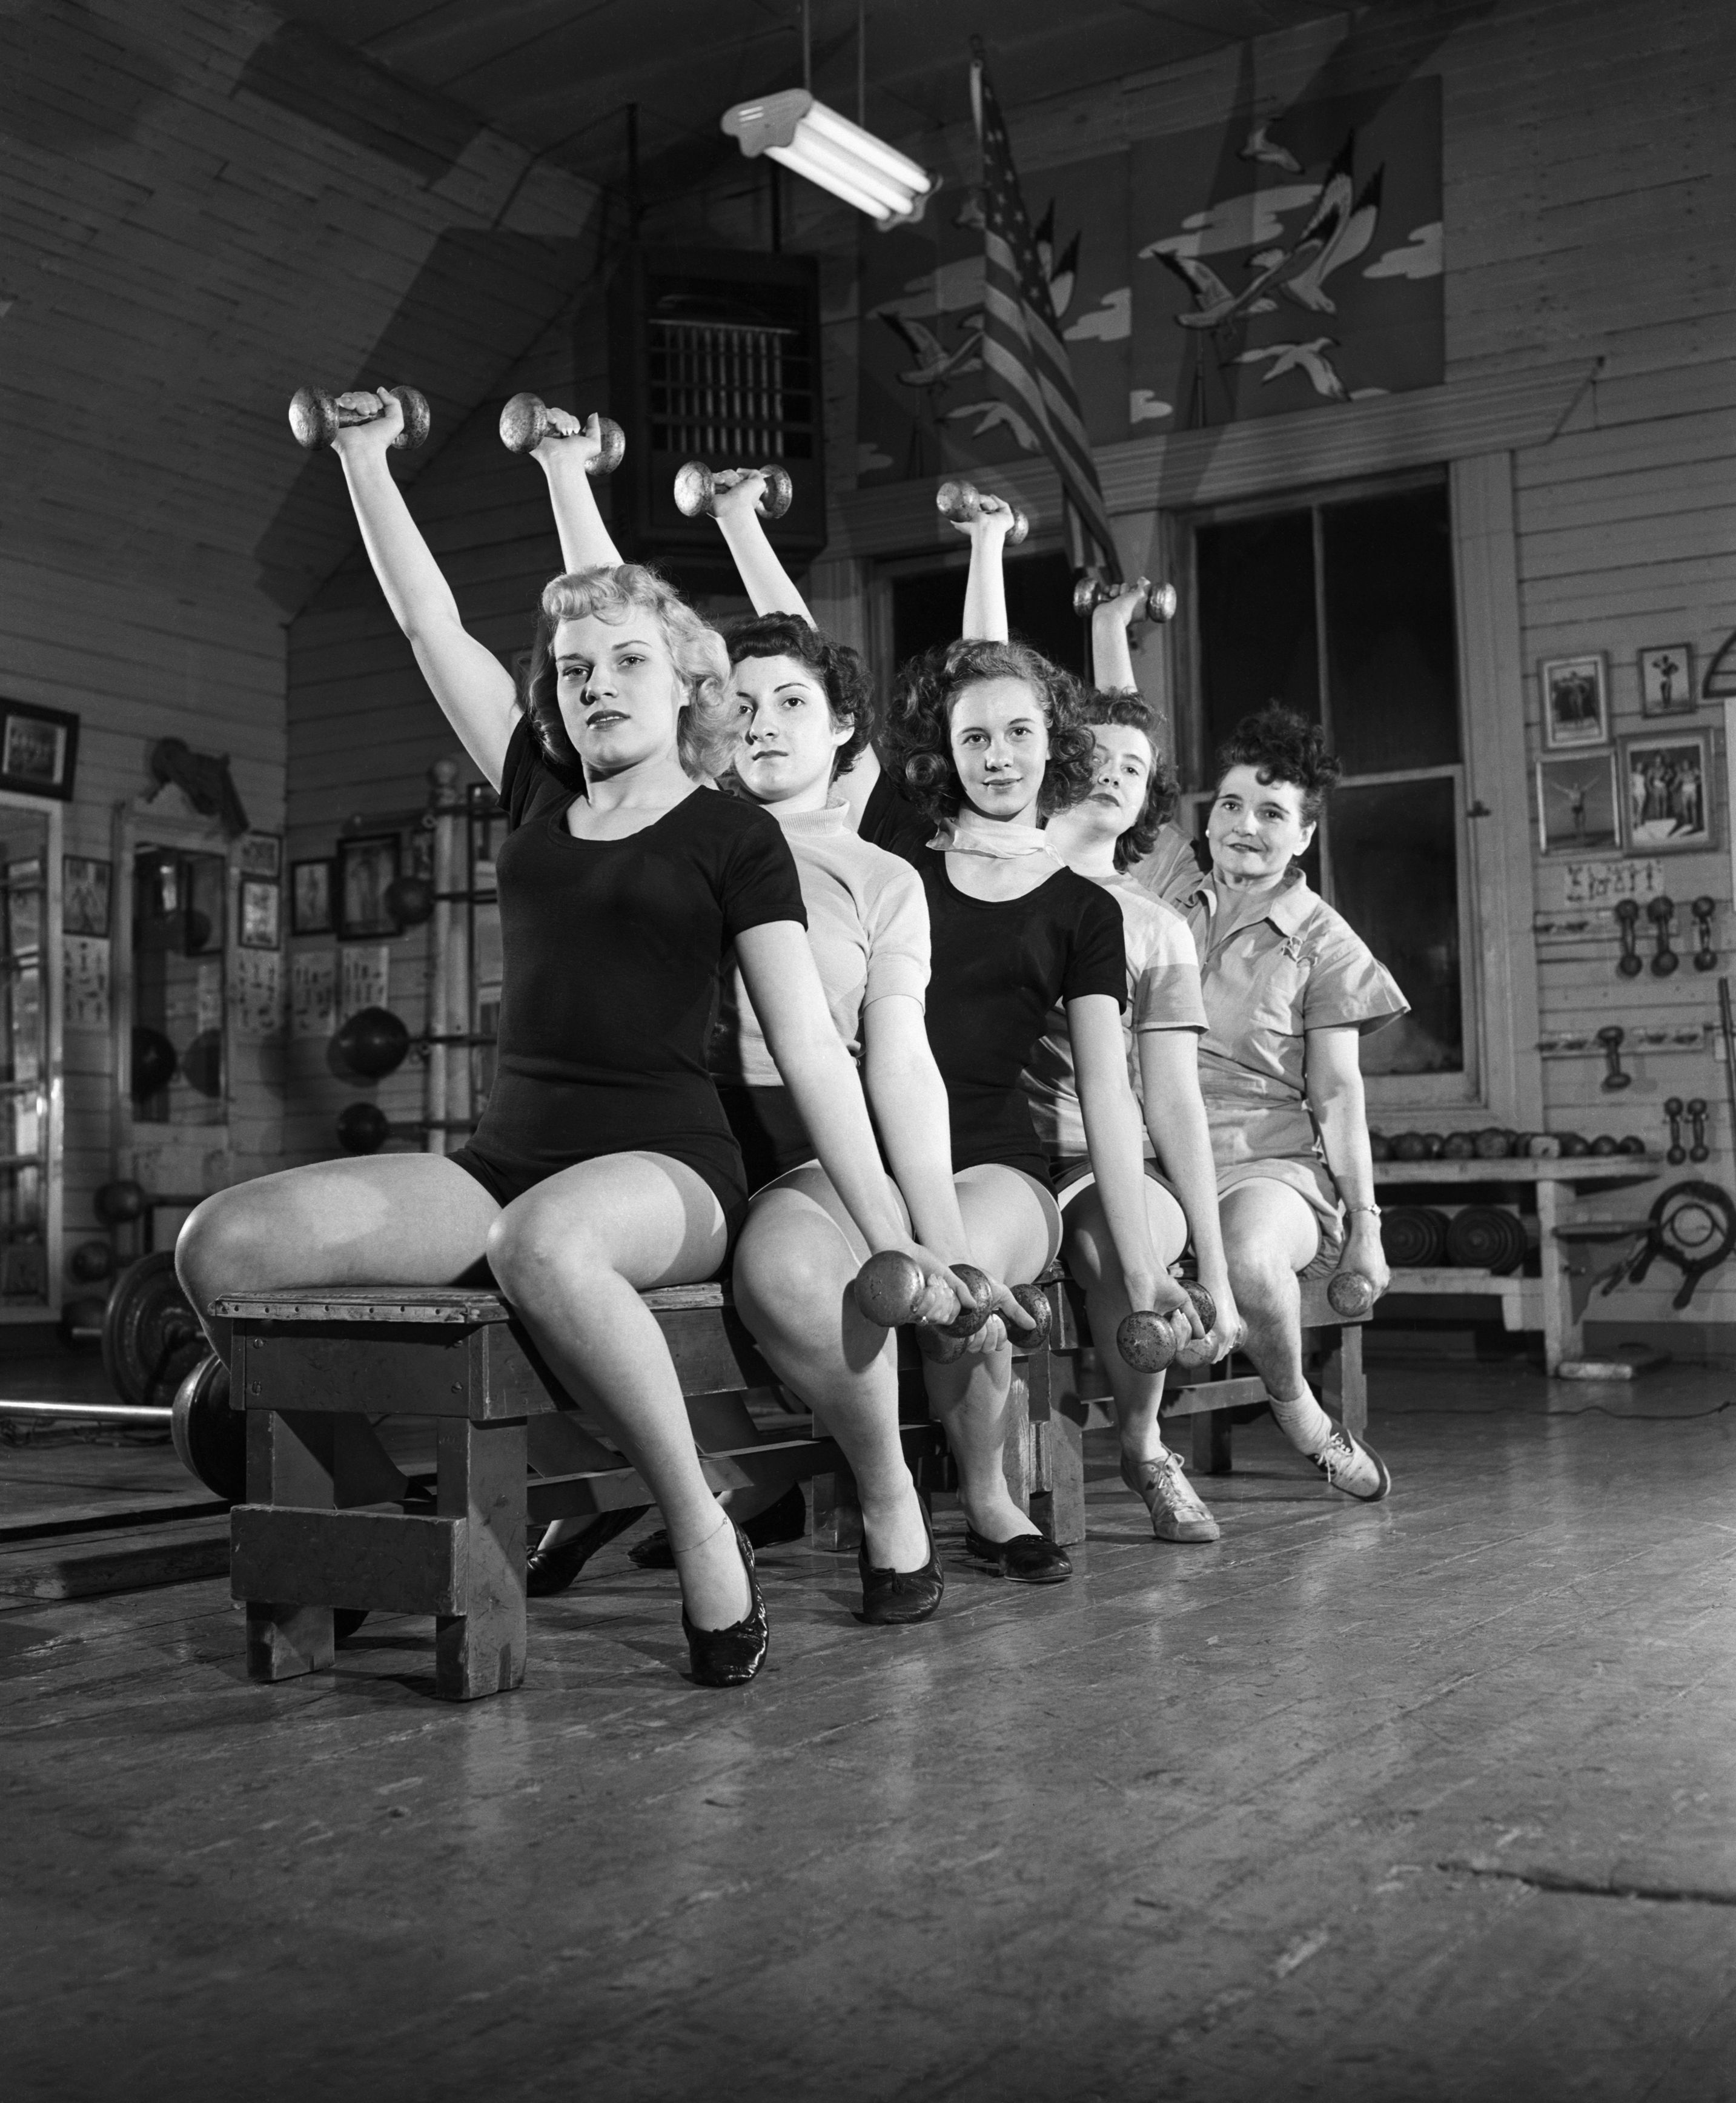 Vintage Photos of People Working Out Through the Years